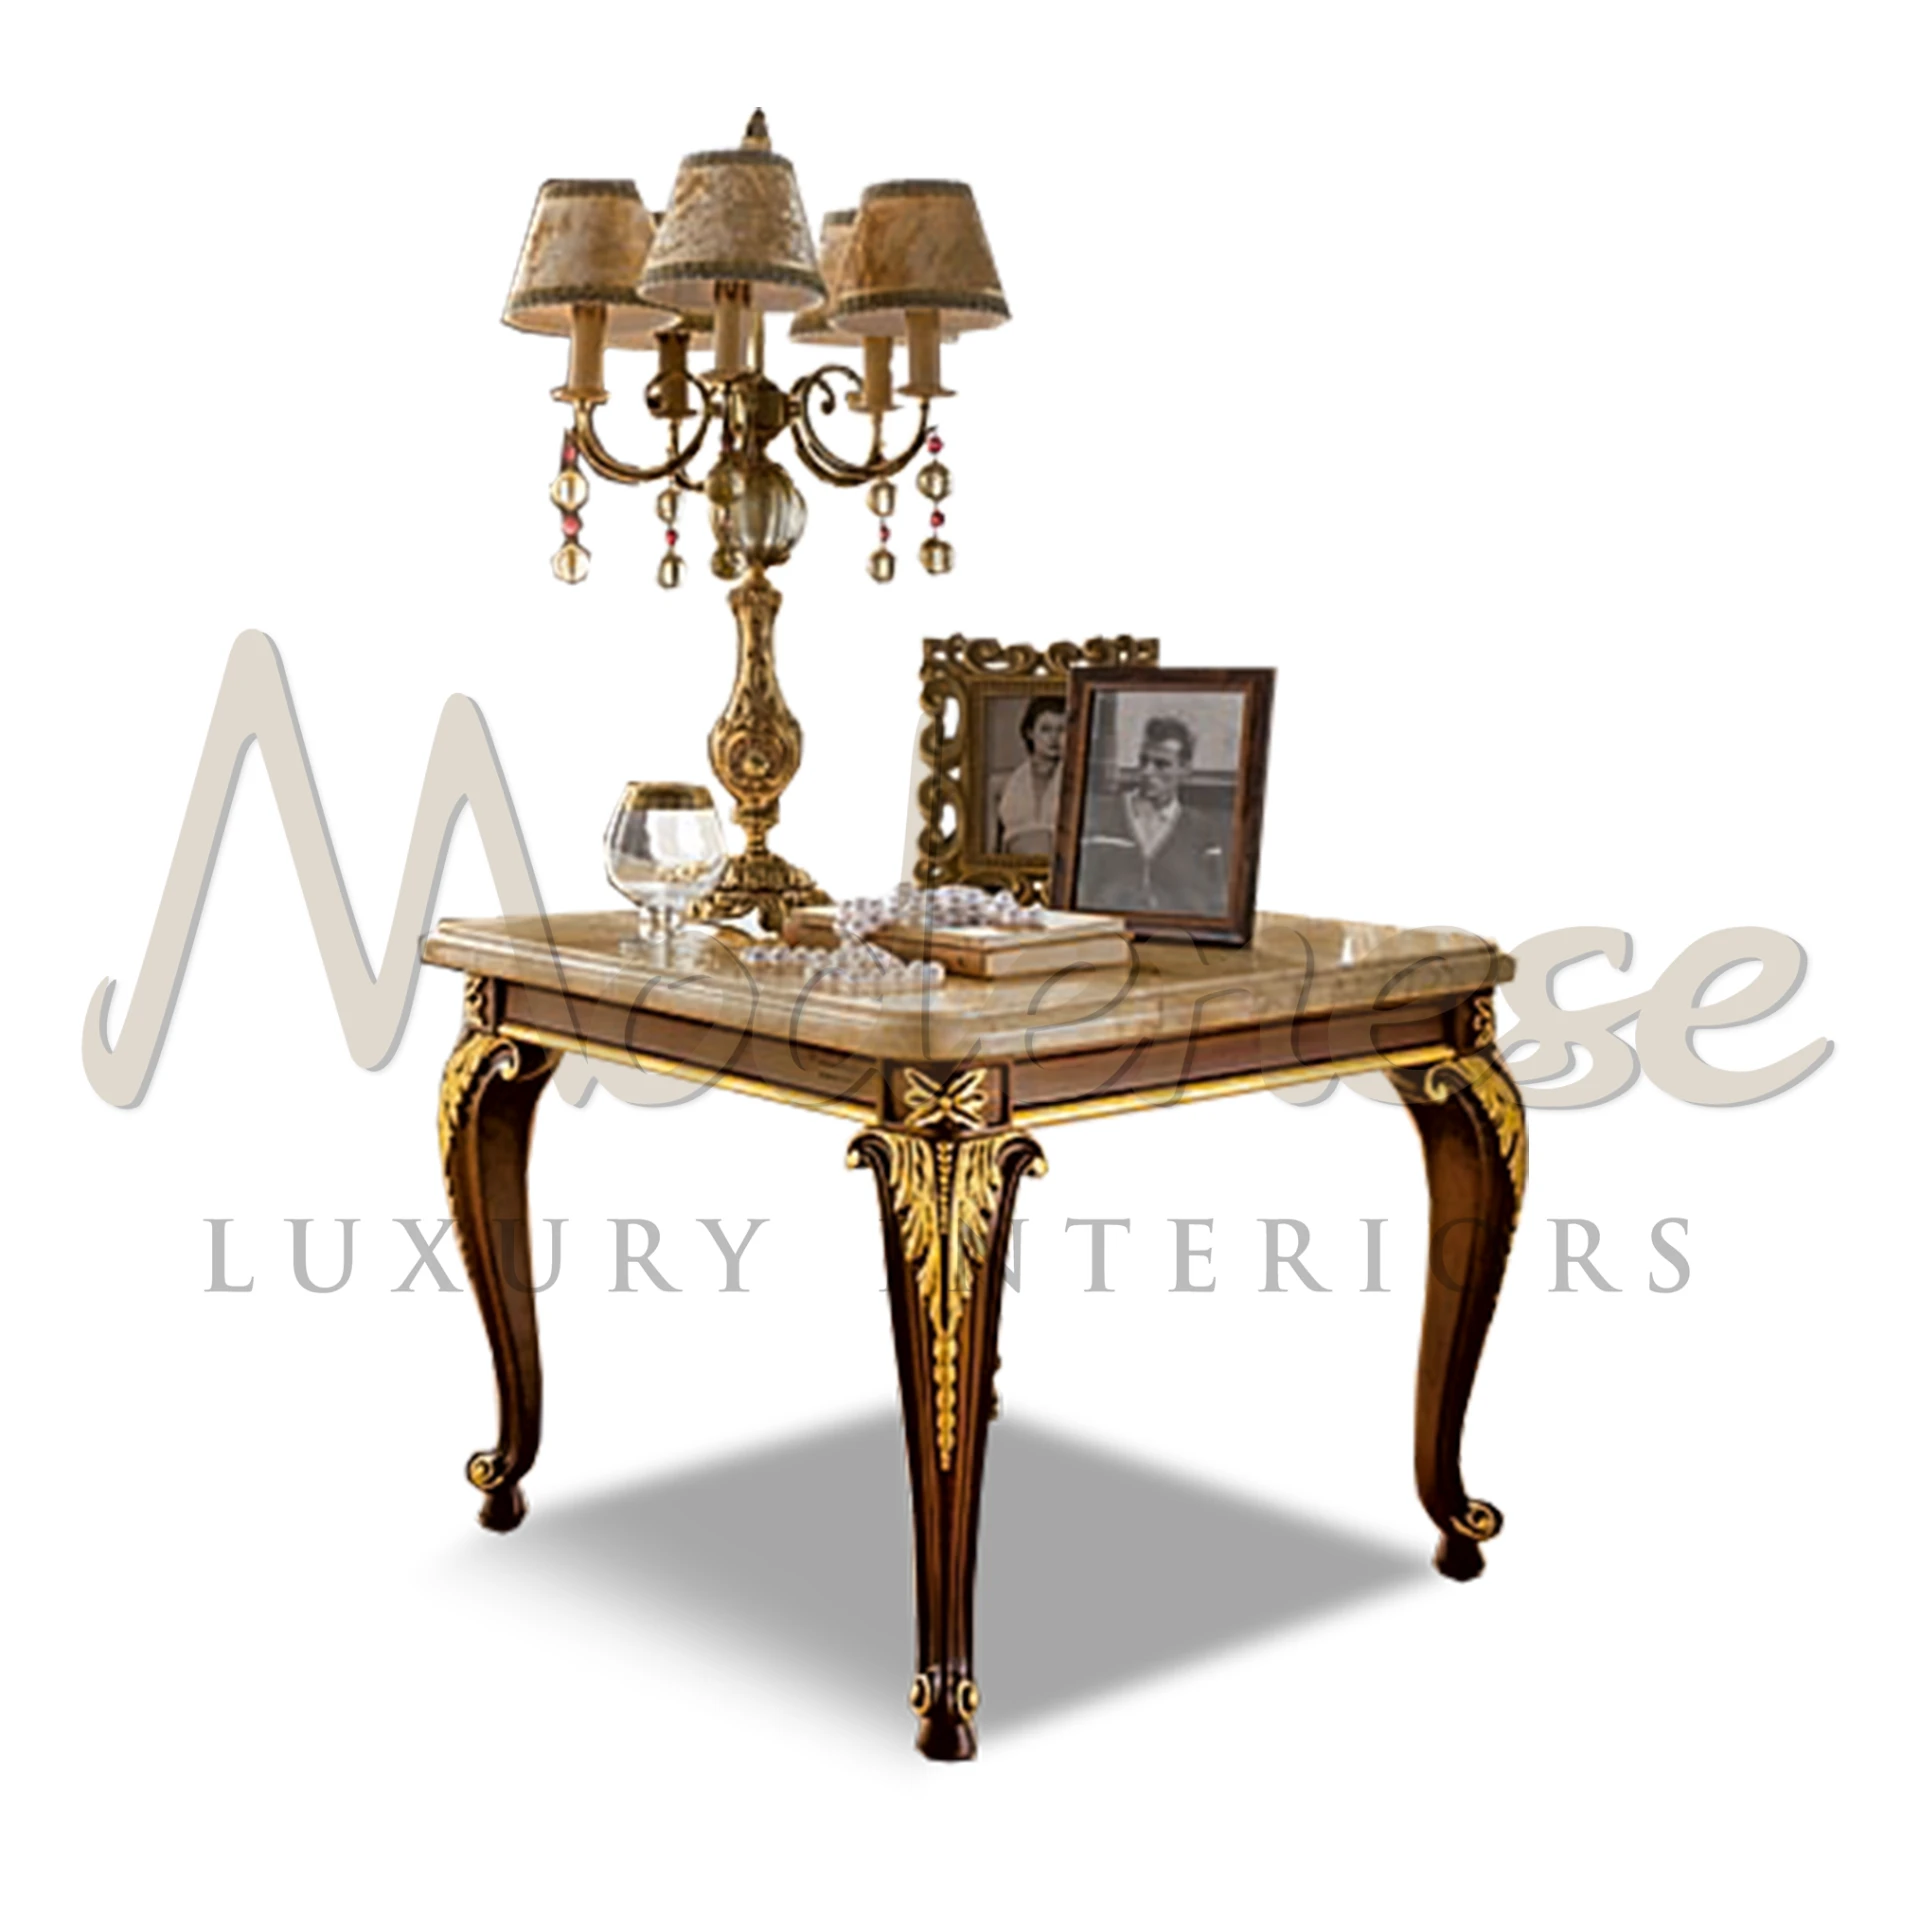 Handcrafted Baroque Gold Leaf Side Table with solid wood and luxurious gold leaf details, perfect for classic interior design.